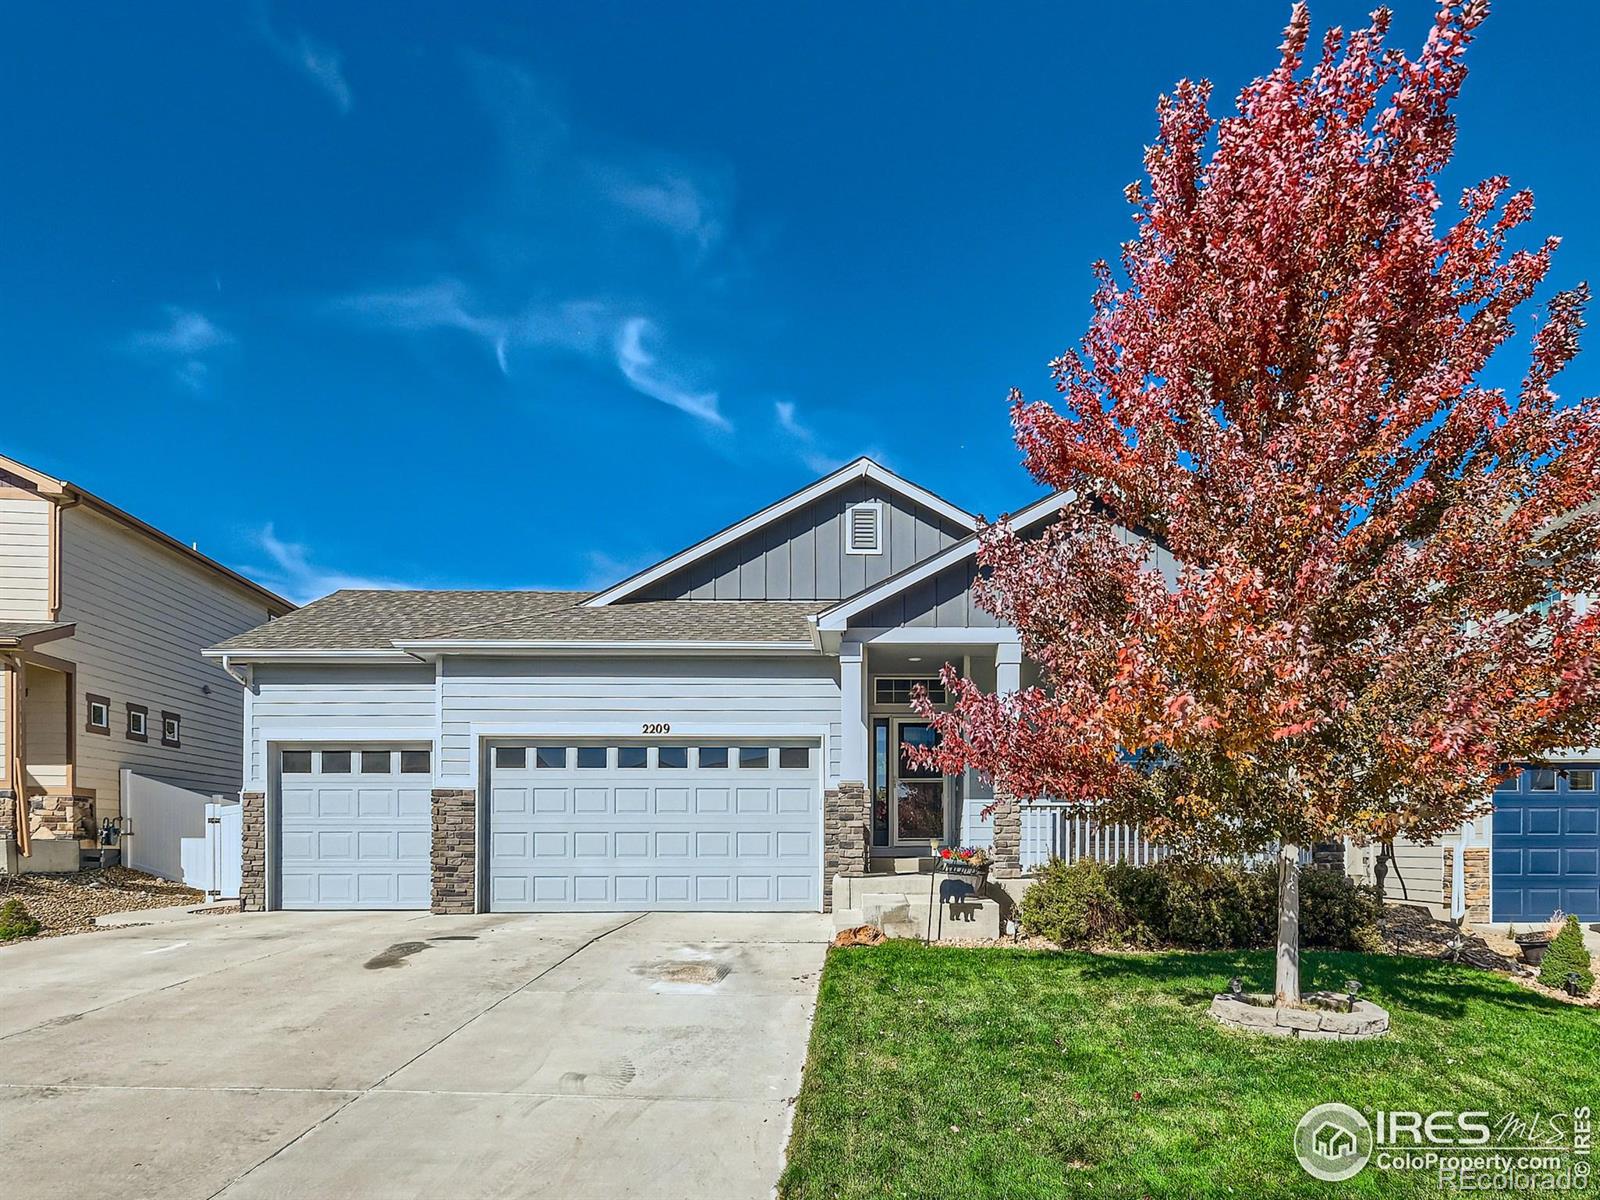 CMA Image for 2302  76th ave ct,Greeley, Colorado